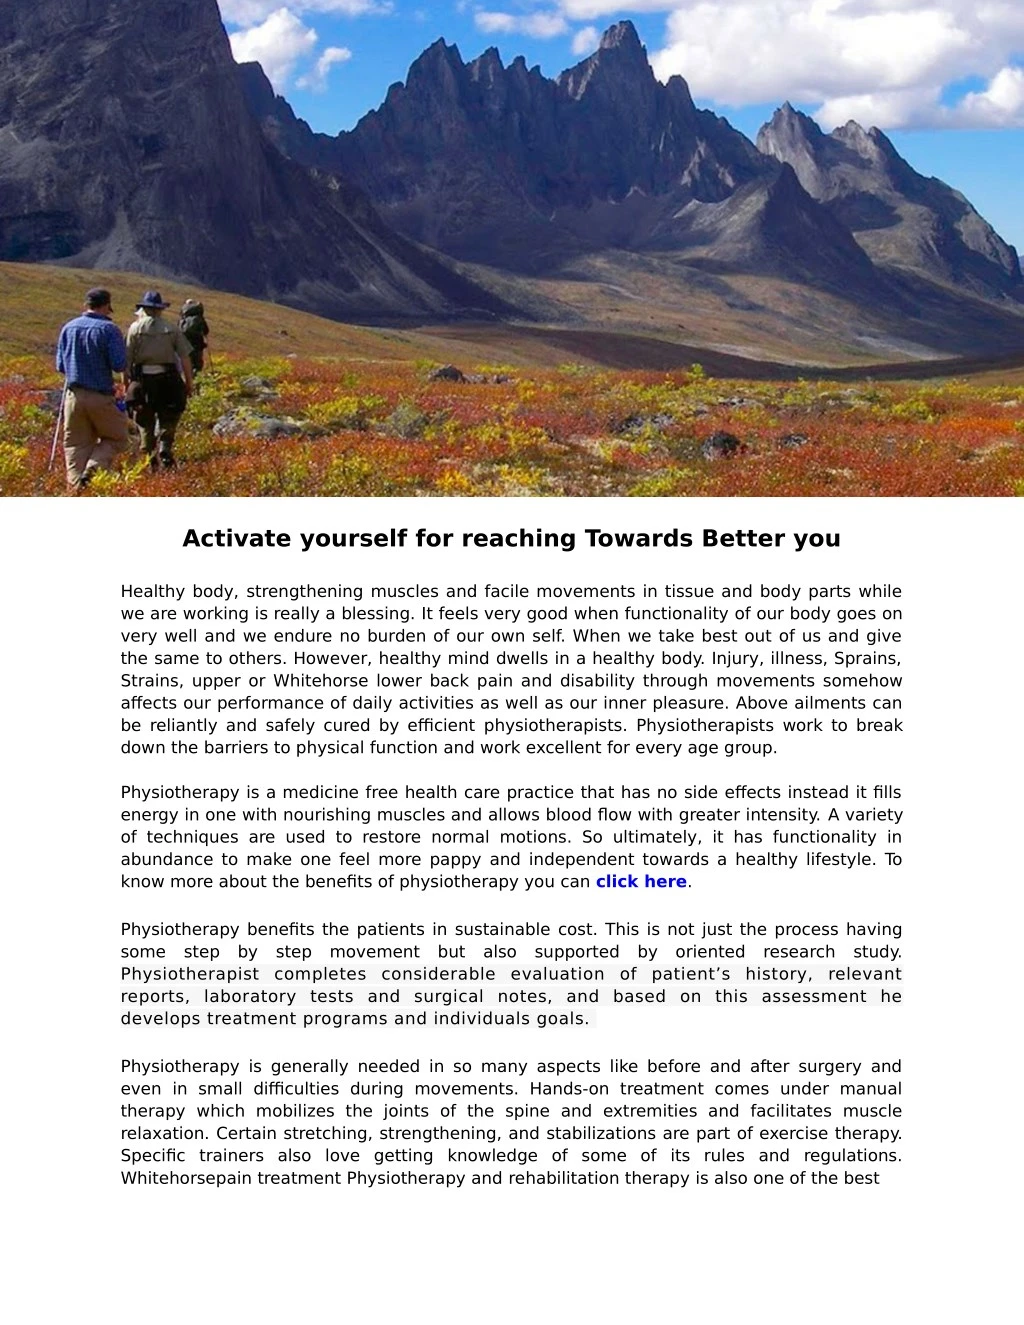 activate yourself for reaching towards better you